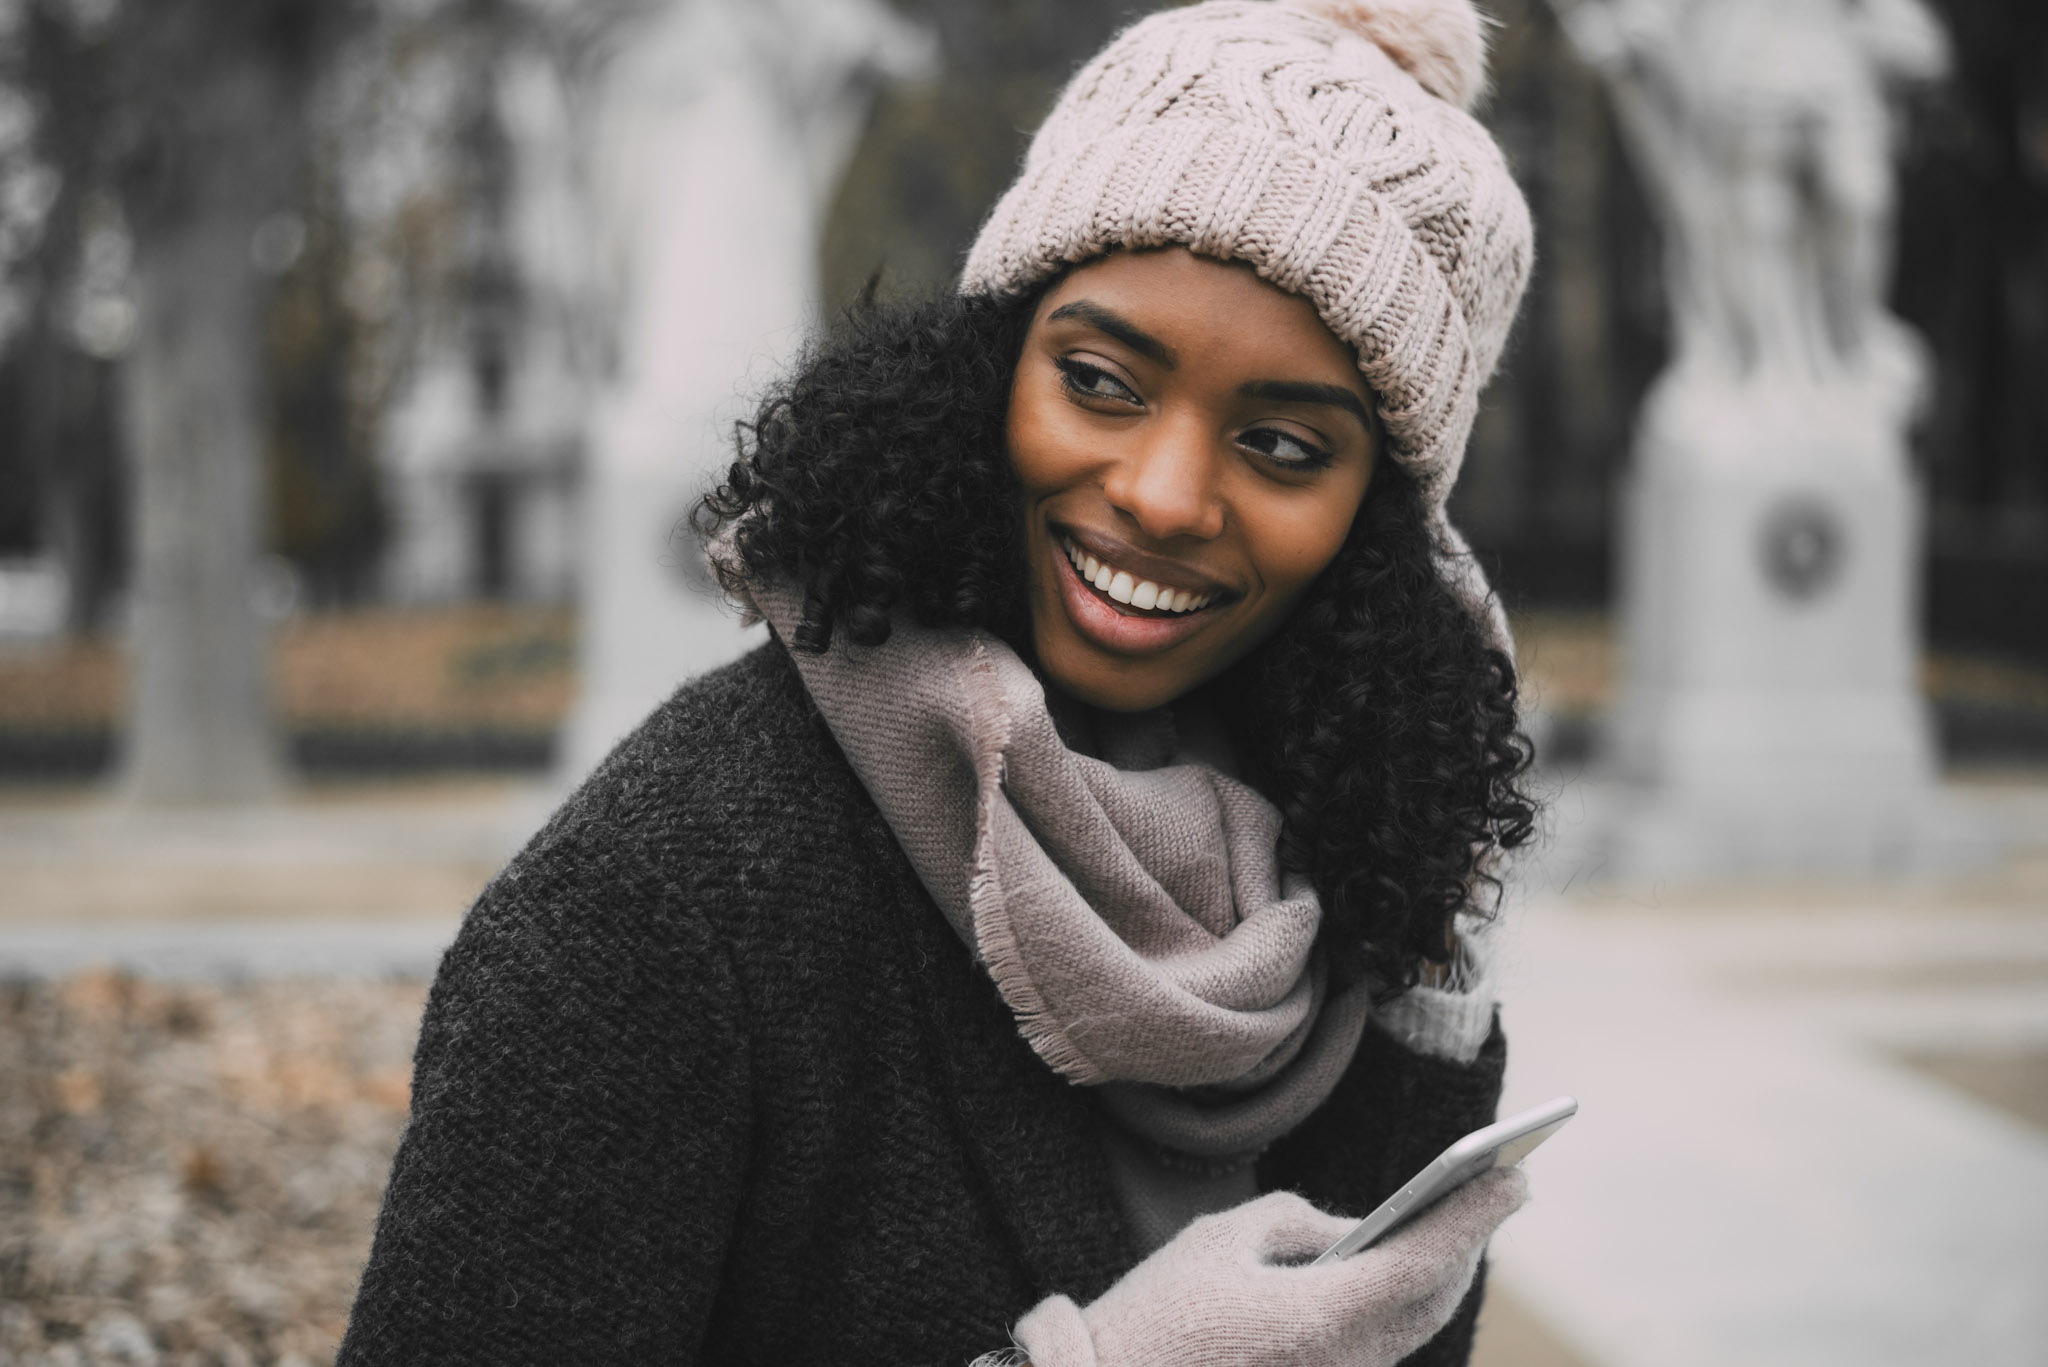 stock photo of a young woman in winter clothing using a smartphone